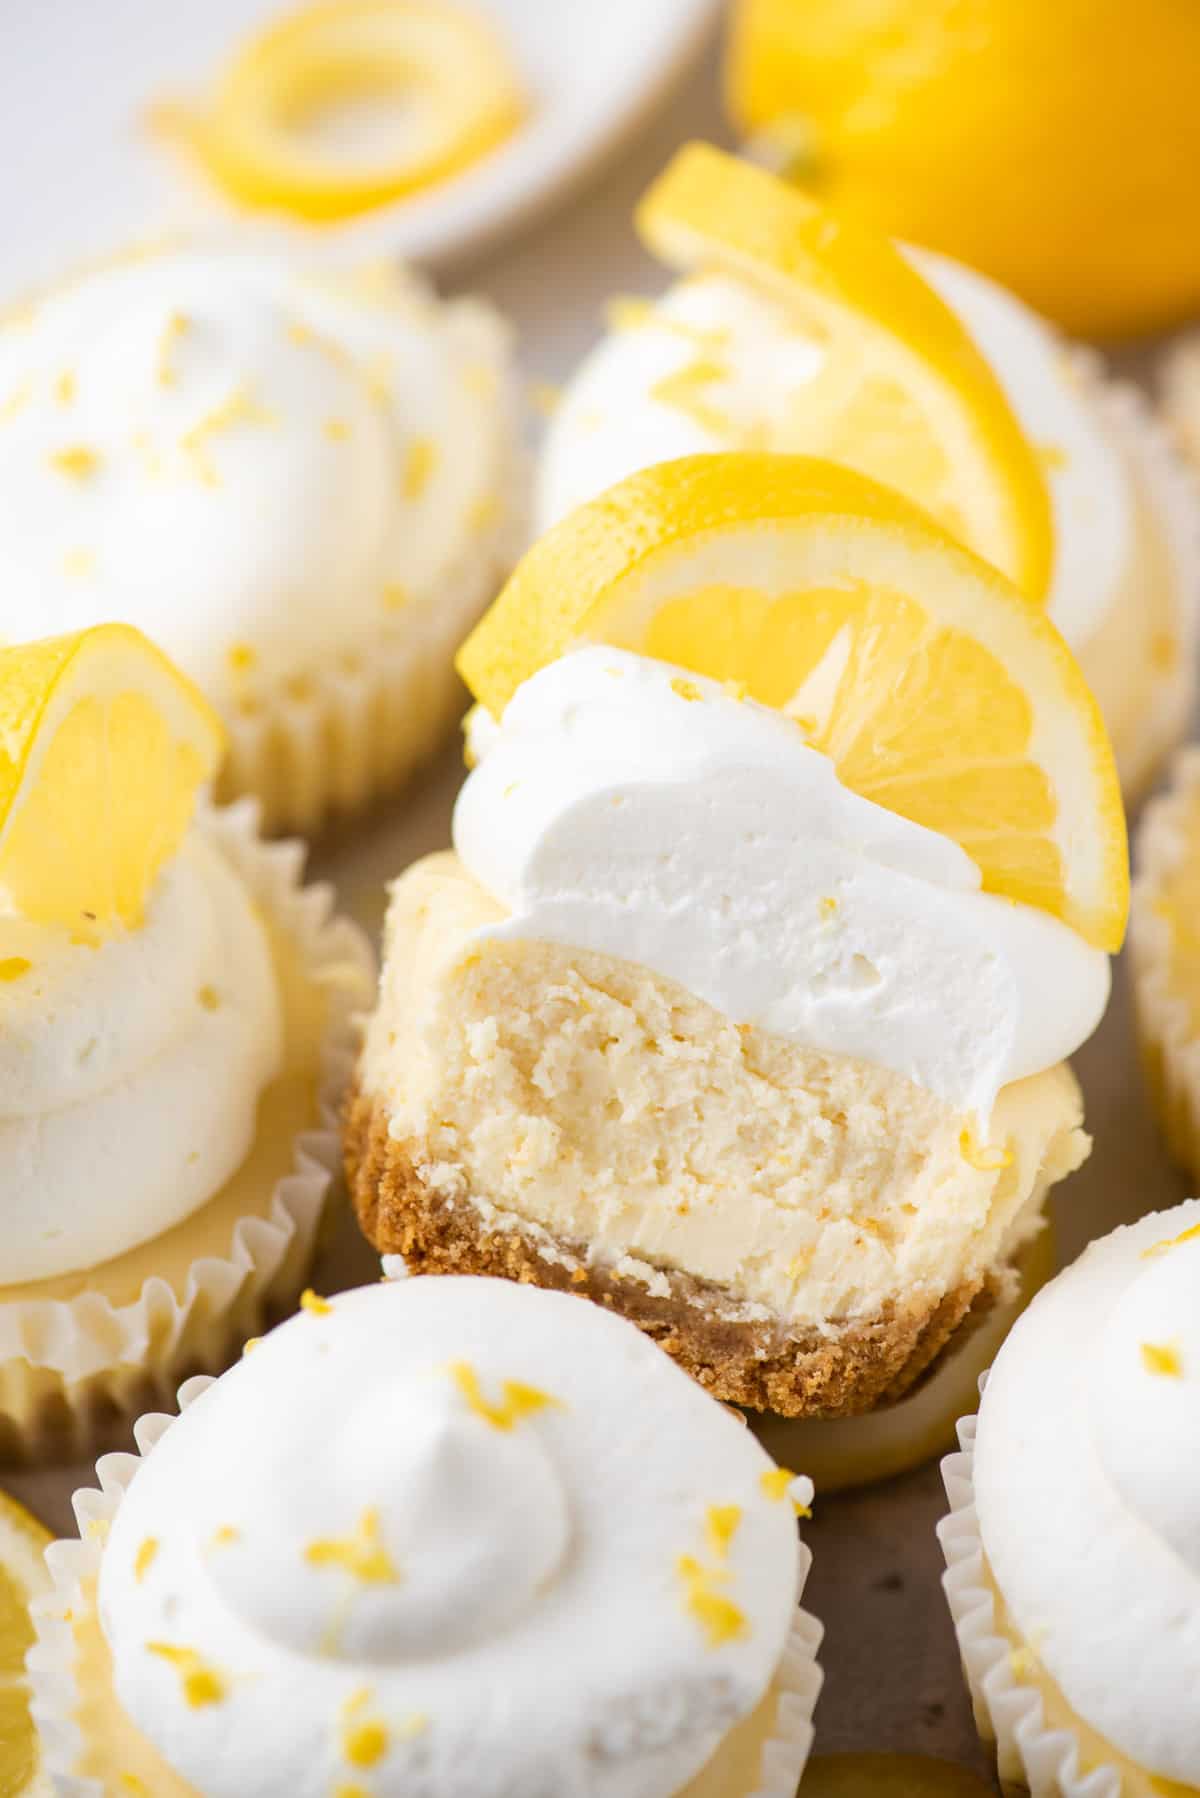 Mini lemon cheesecake topped with whipped cream and lemon slice with bite removed with more mini cheesecakes surrounding it